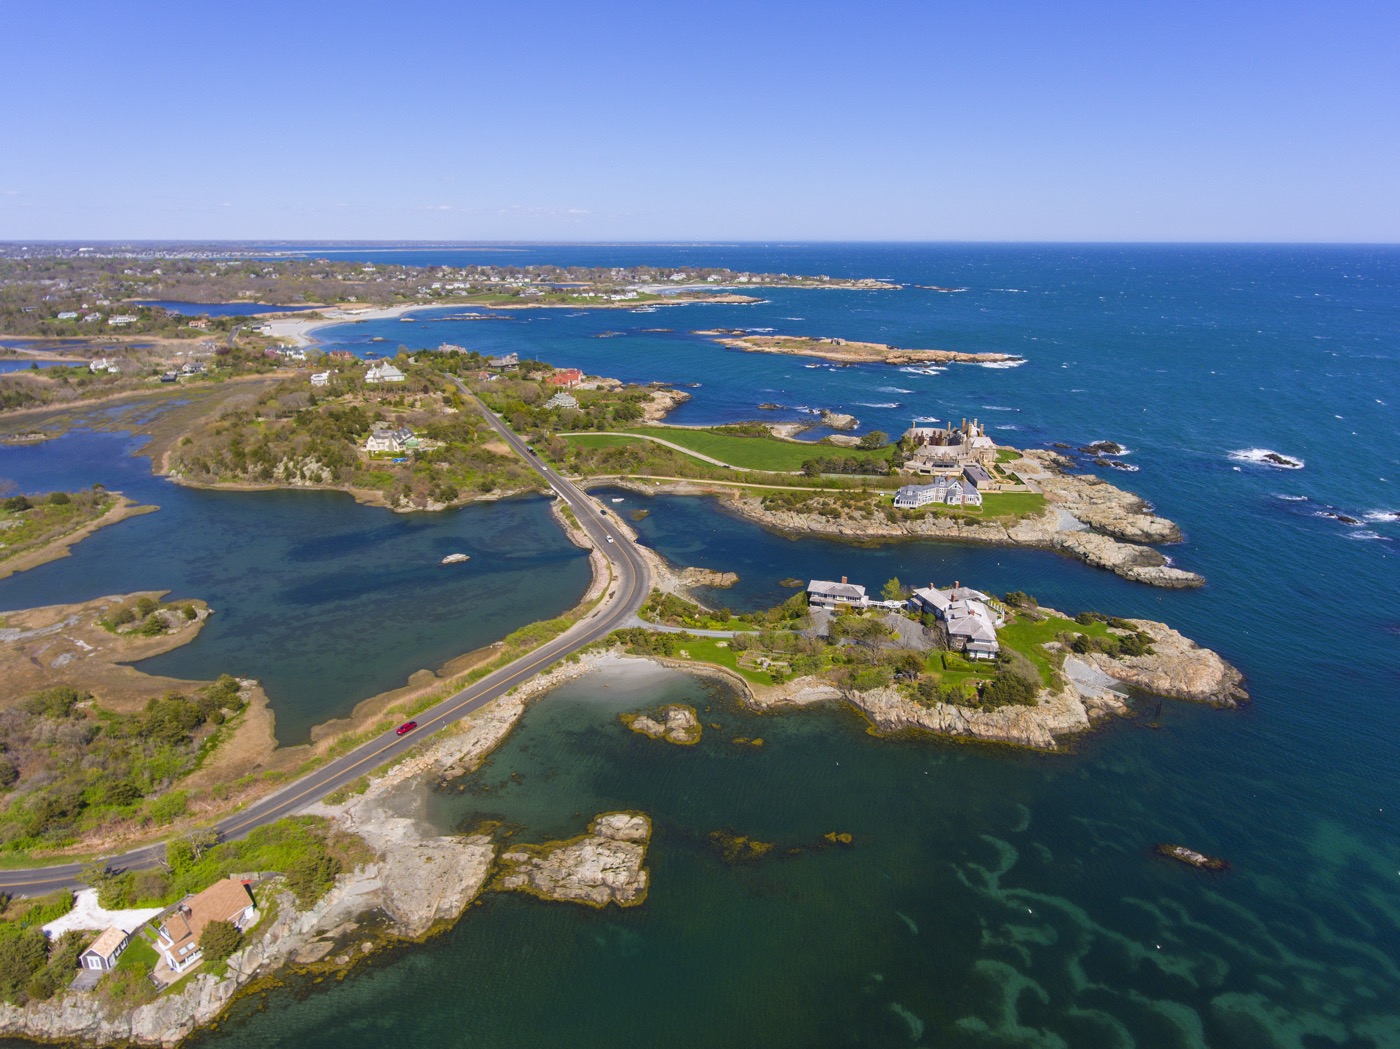 13 THINGS TO DO IN NEWPORT RI EVERYONE WILL LOVE